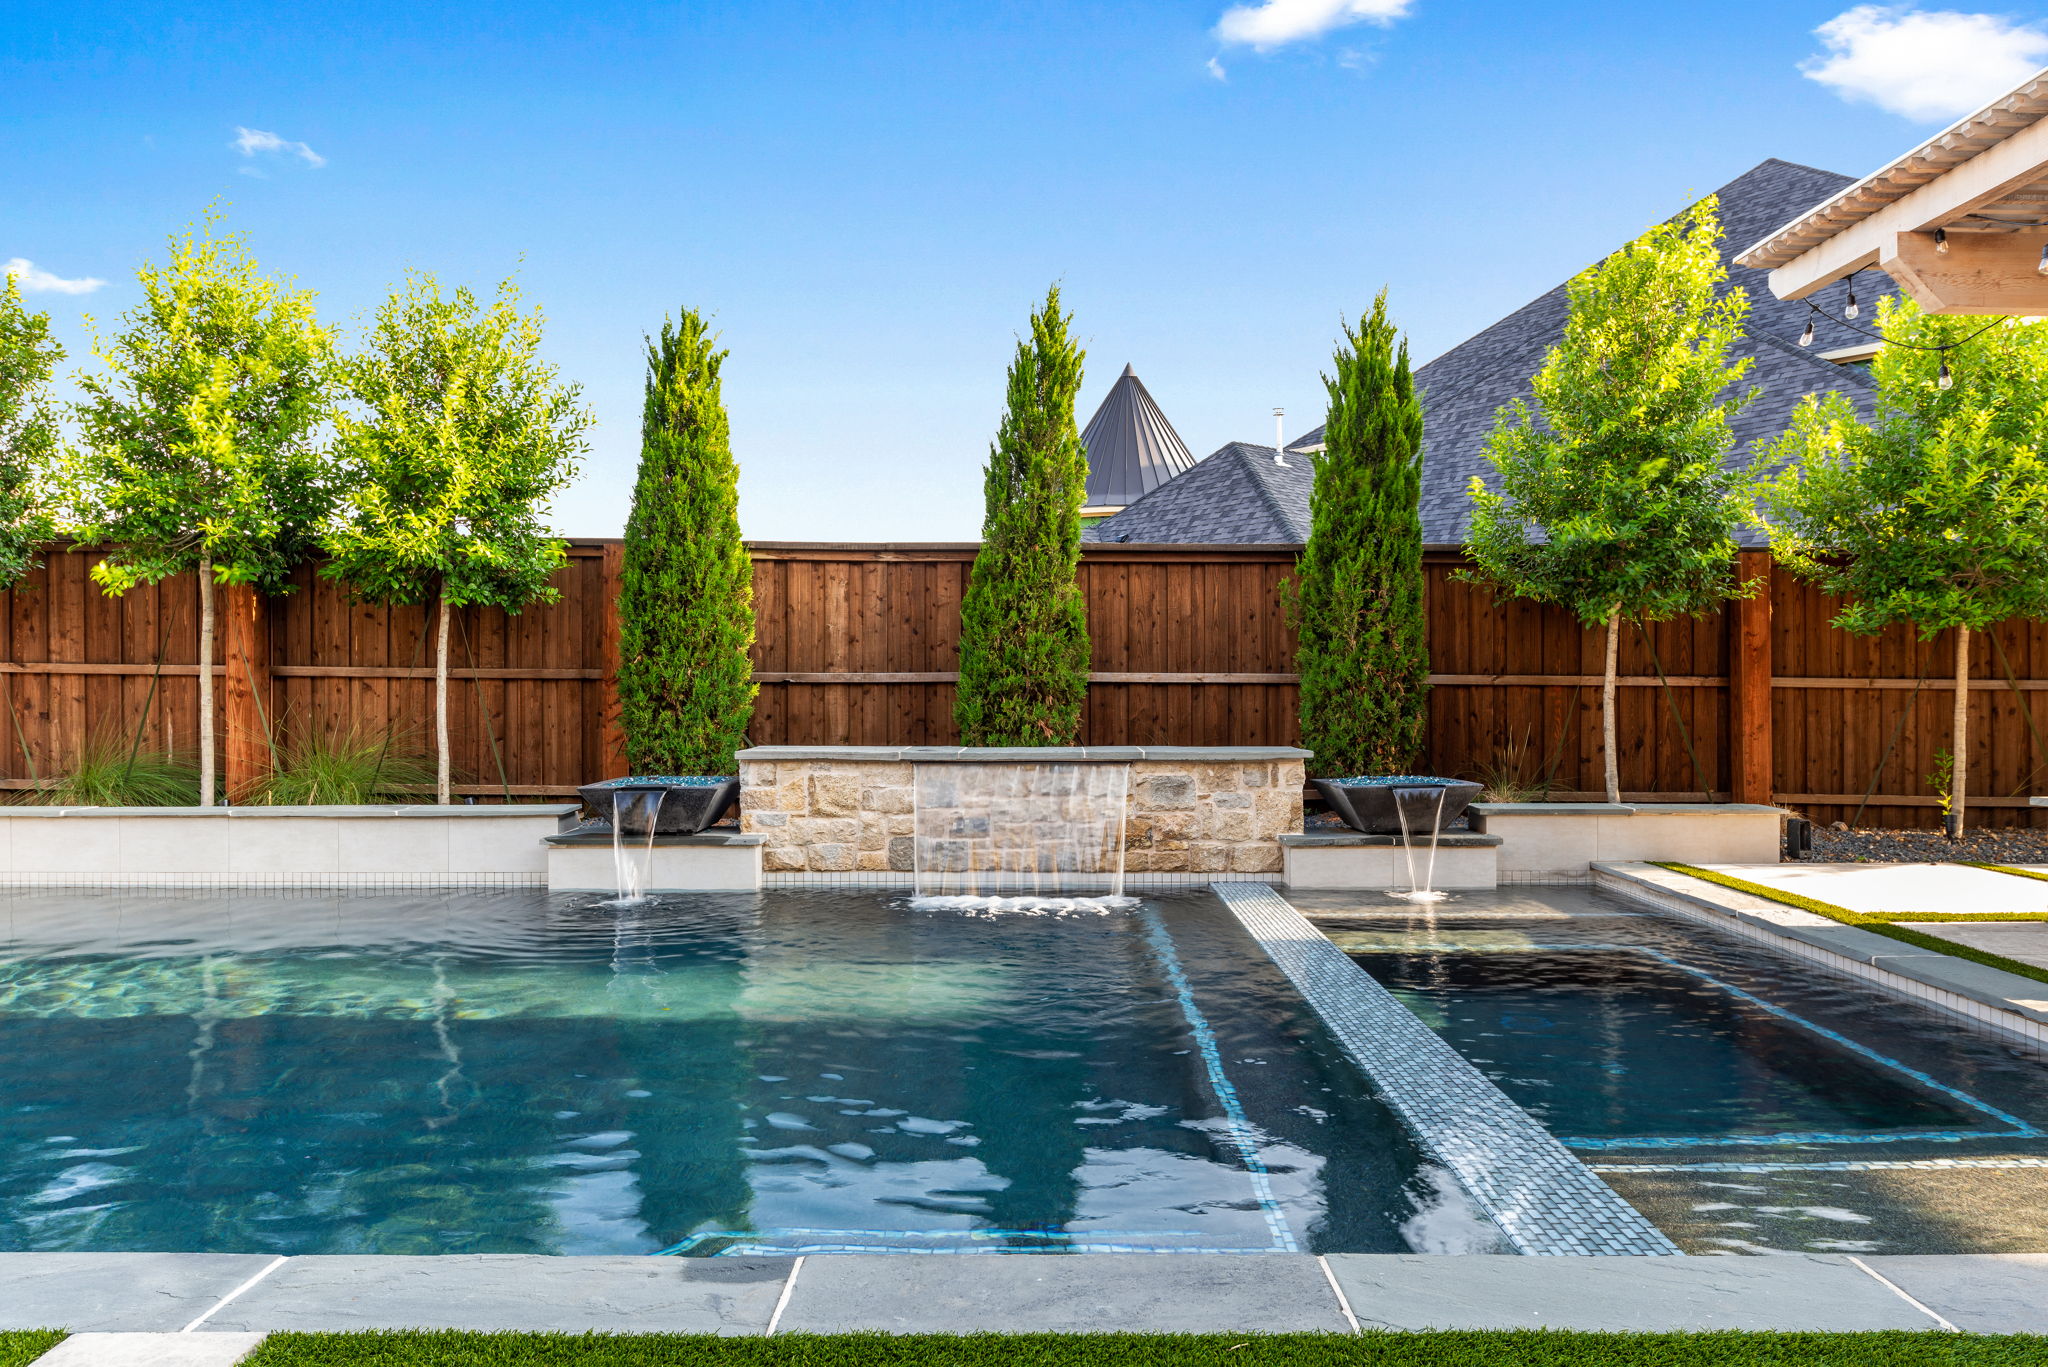 Swimming pool with retaining wall and water features